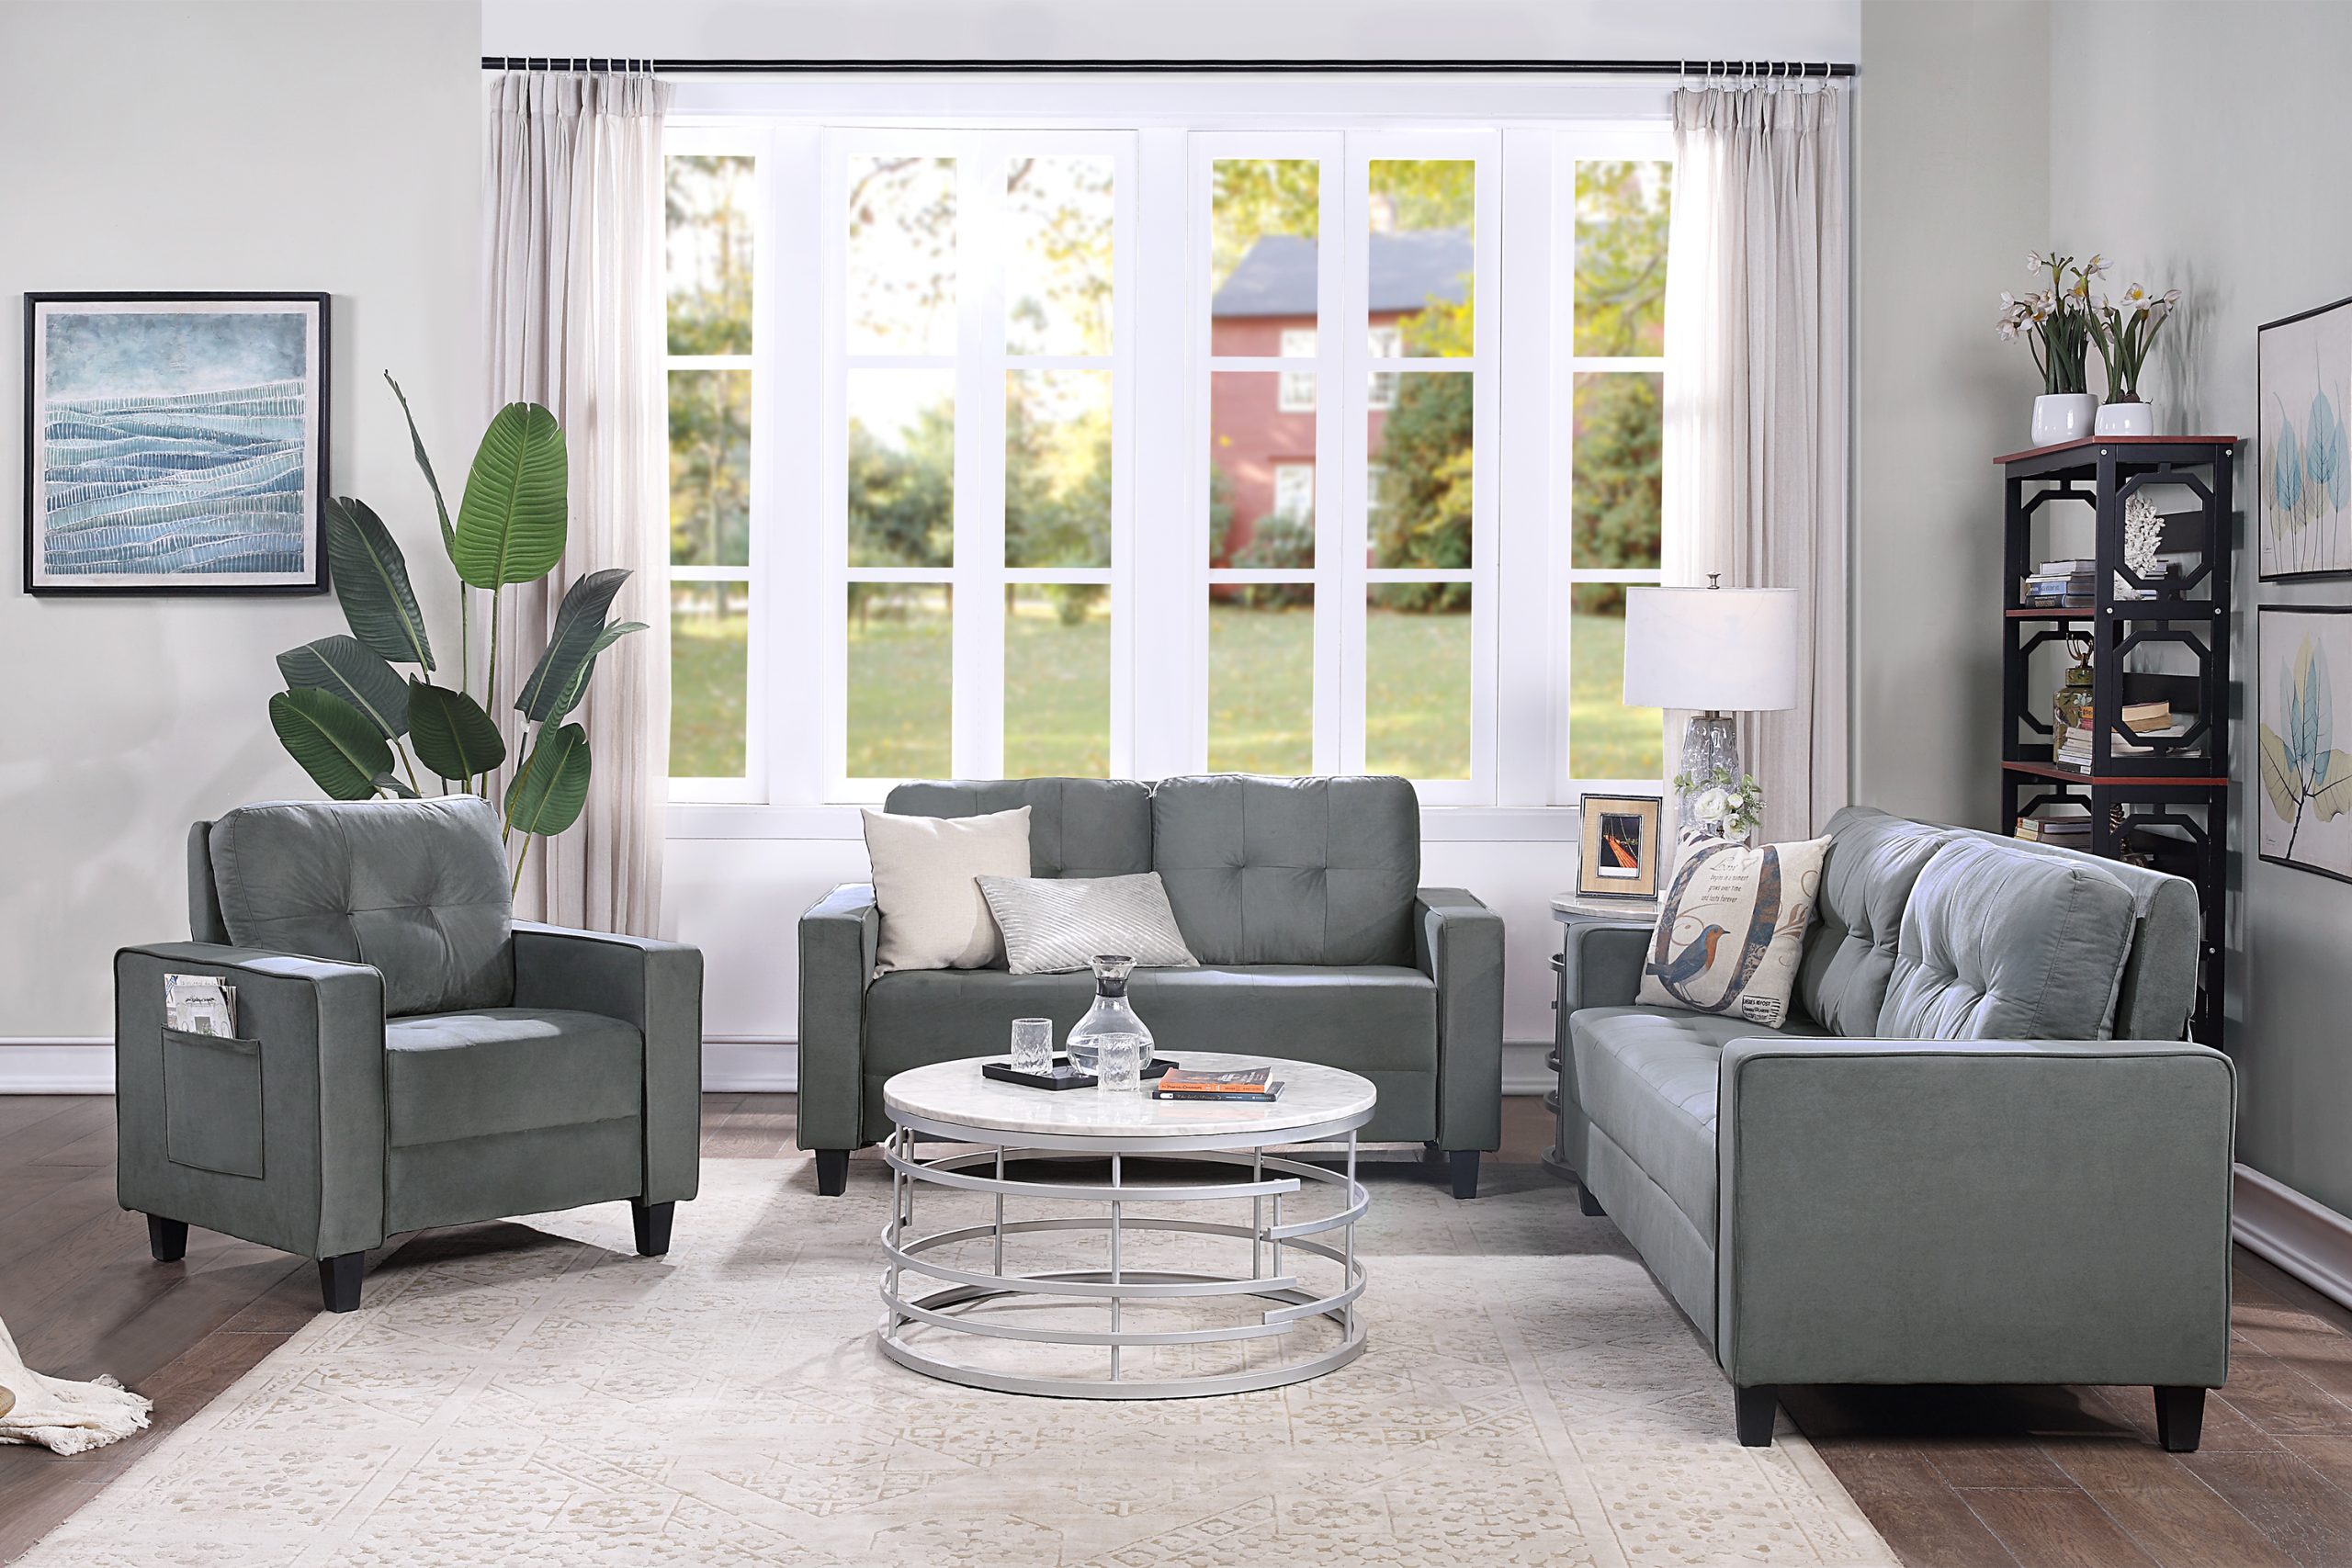 Morden Style Upholstered Sectional Sofa Set, 1+2+3-seat